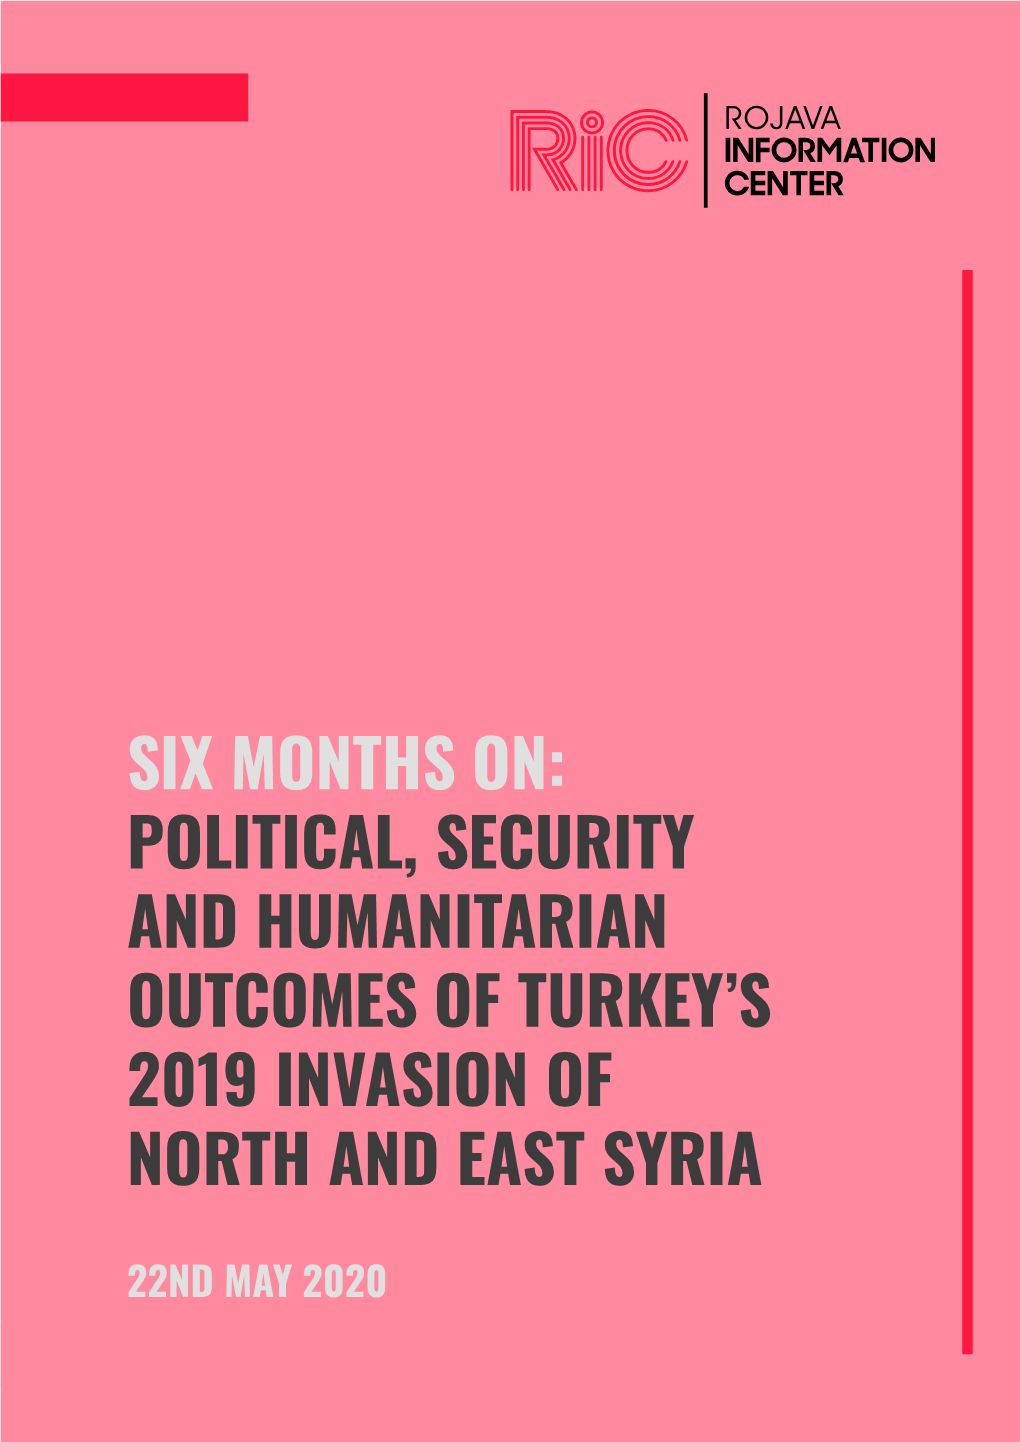 Political, Security and Humanitarian Outcomes of Turkey's 2019 Invasion of North and East Syria